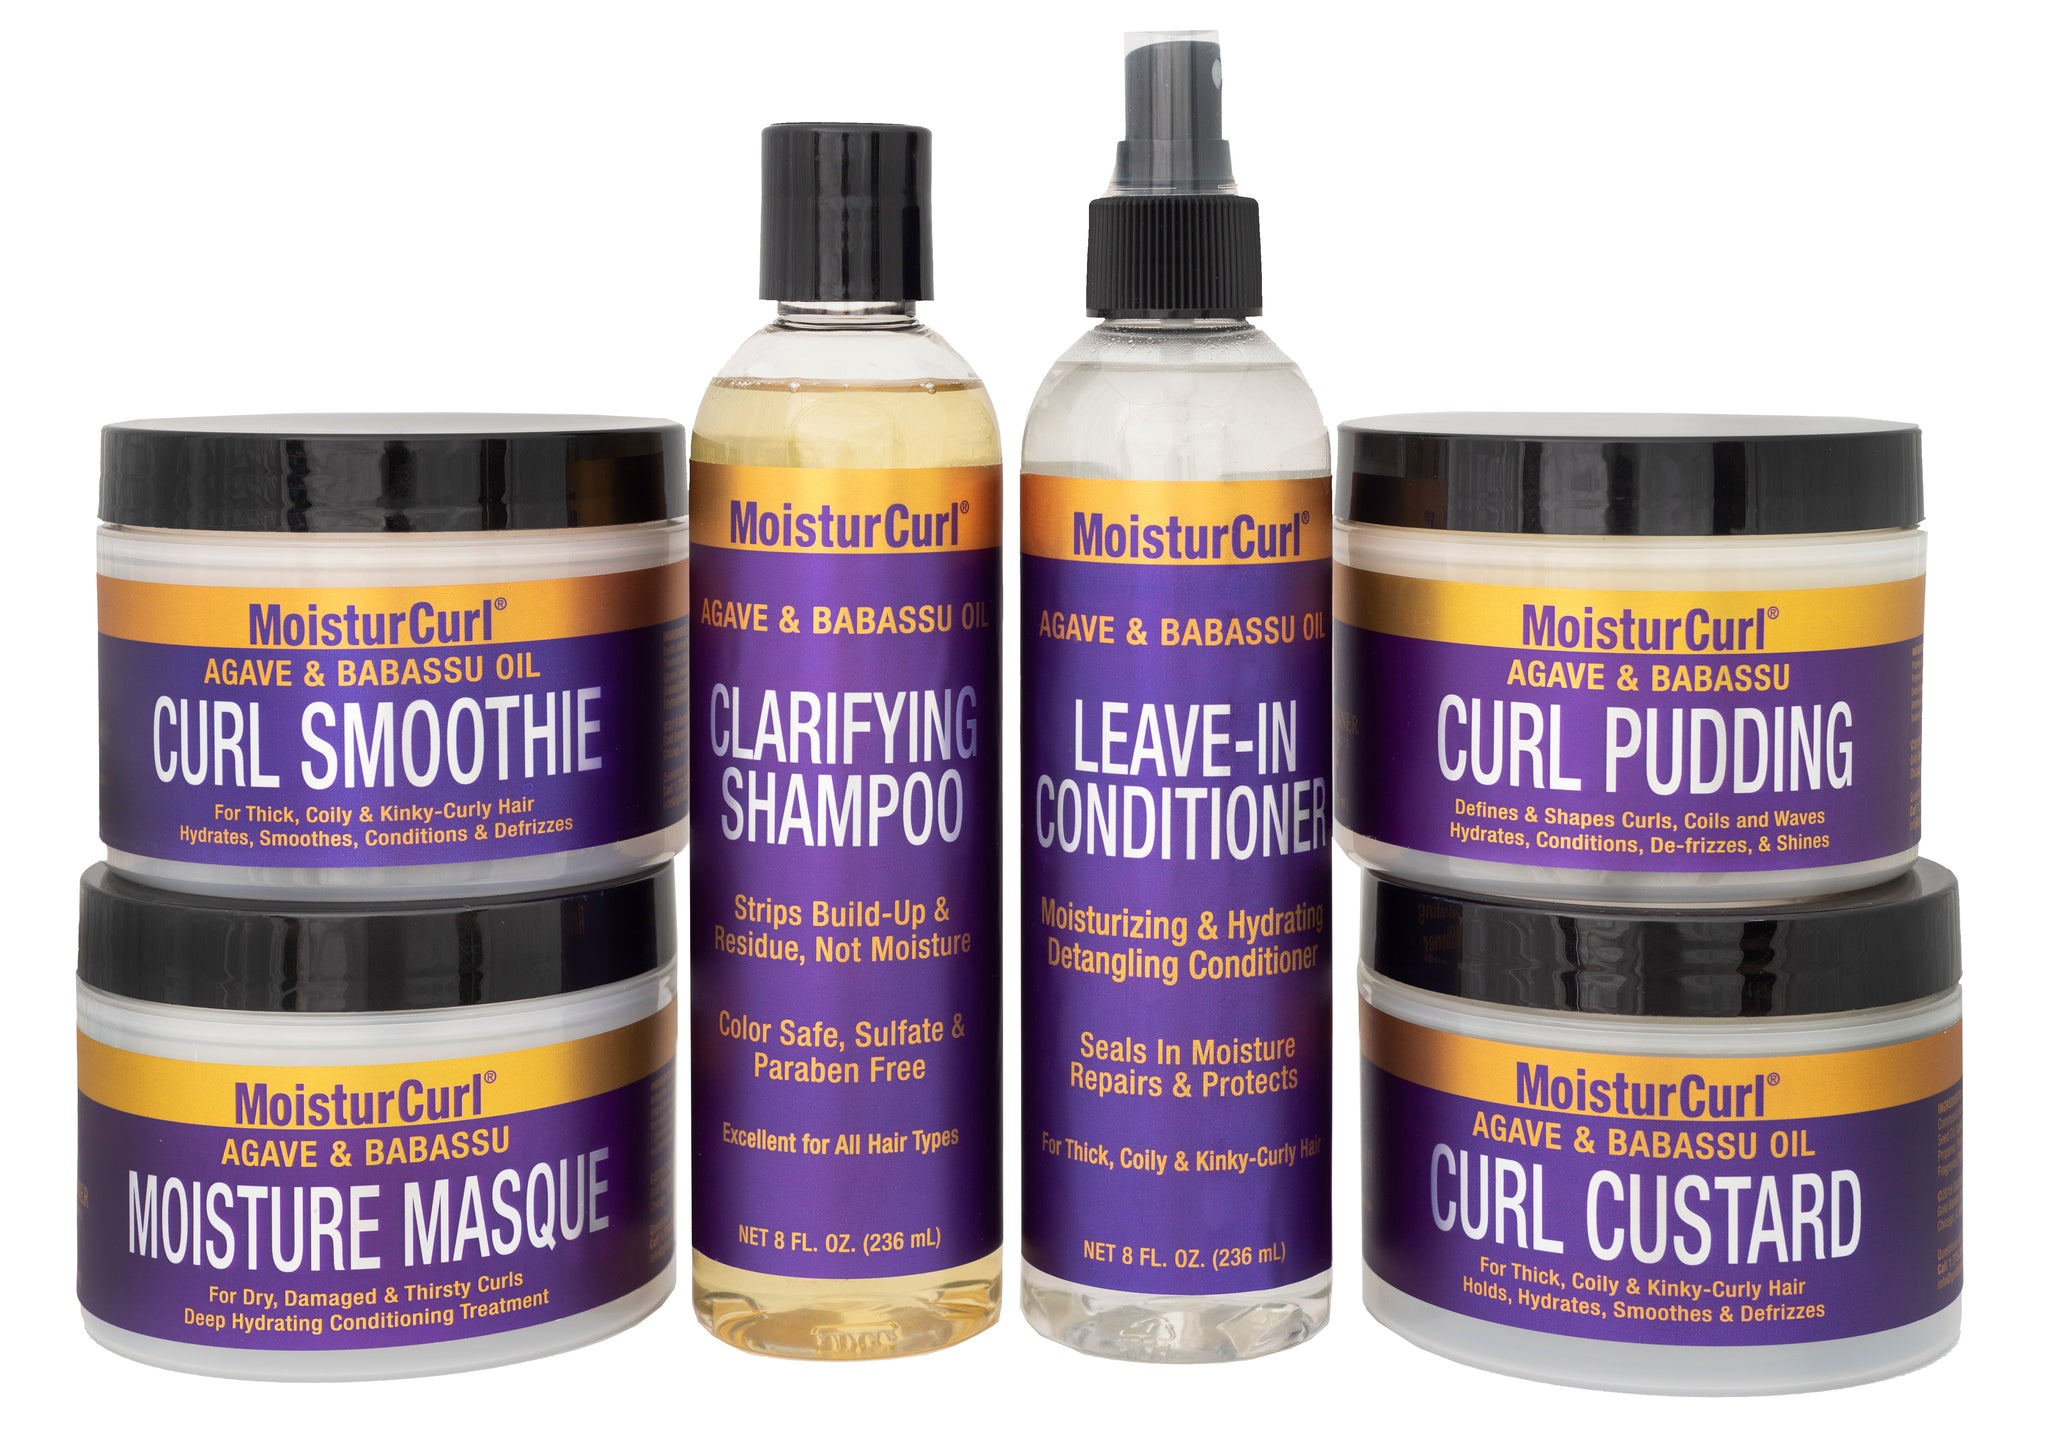 MoisturCurl Clarifying Shampoo, Deep Cleans, Removes Dulling Deposits & Product Buildup, Adds Volume, Restores Shine, Made with Agave & Babassu Butters 8oz.